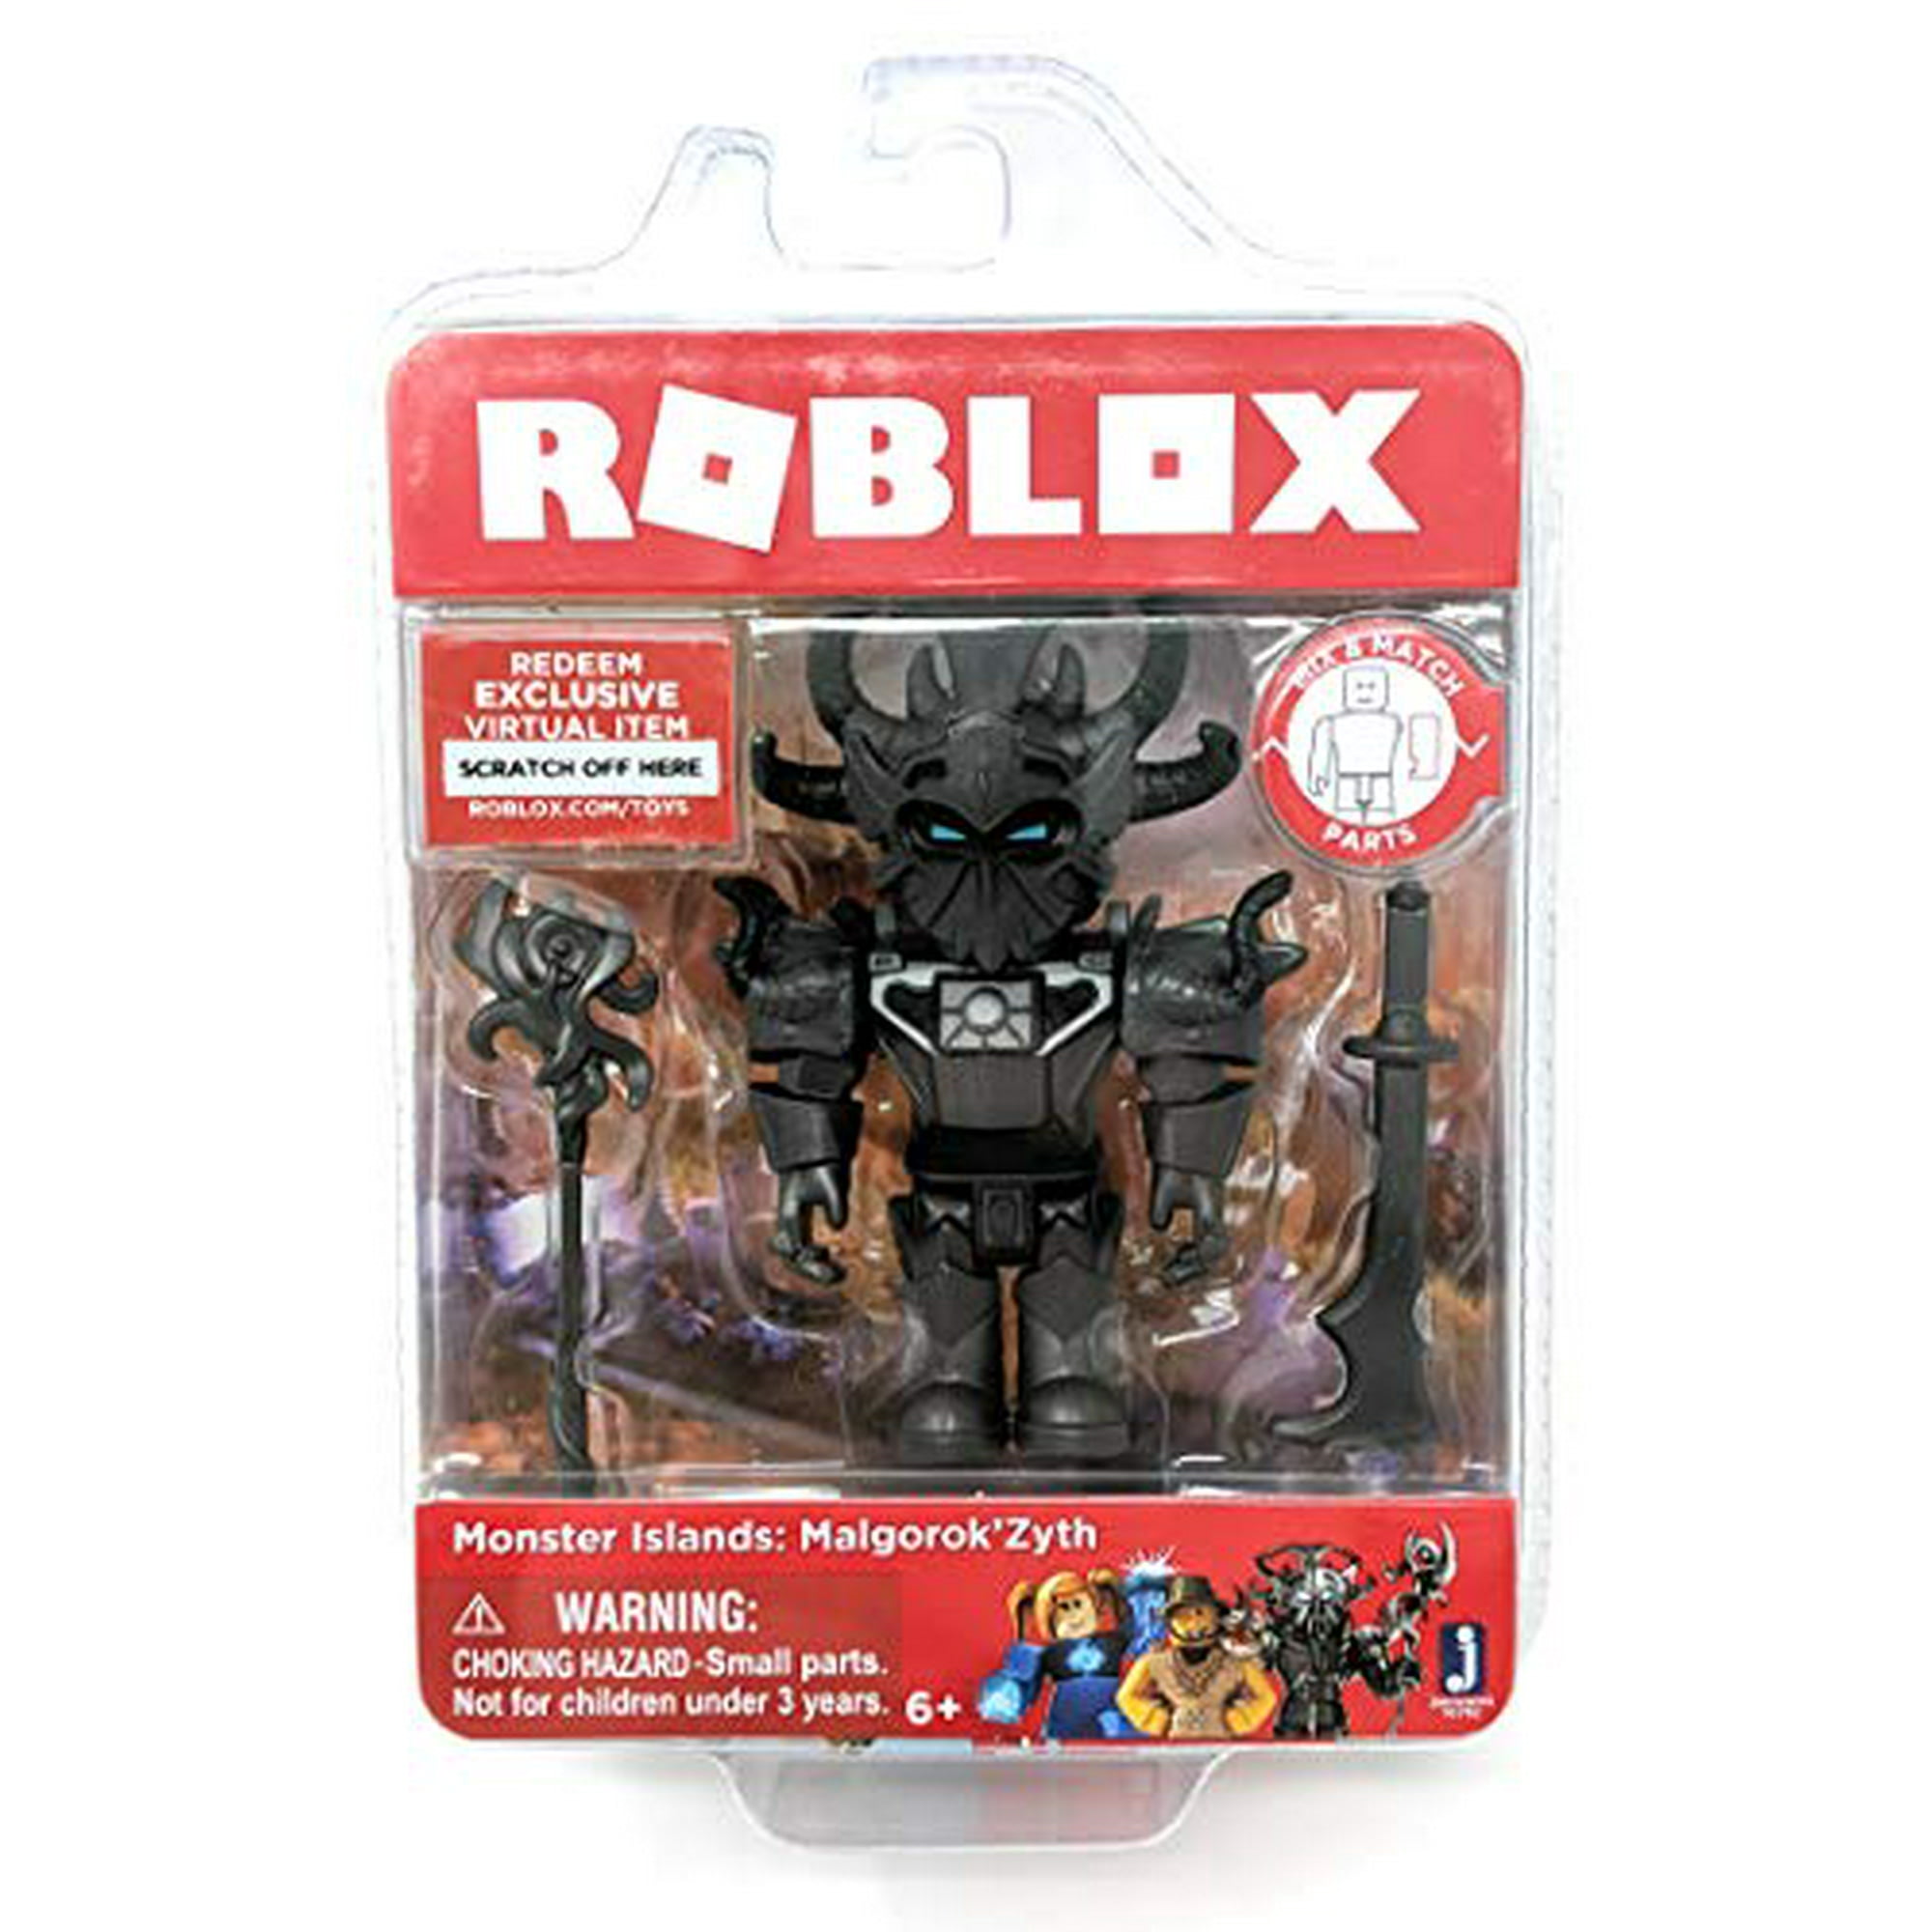 Roblox Monster Islands Malgorok Zyth Single Figure Core Pack With Exclusive Virtual Item Code Walmart Canada - monster scarf roblox